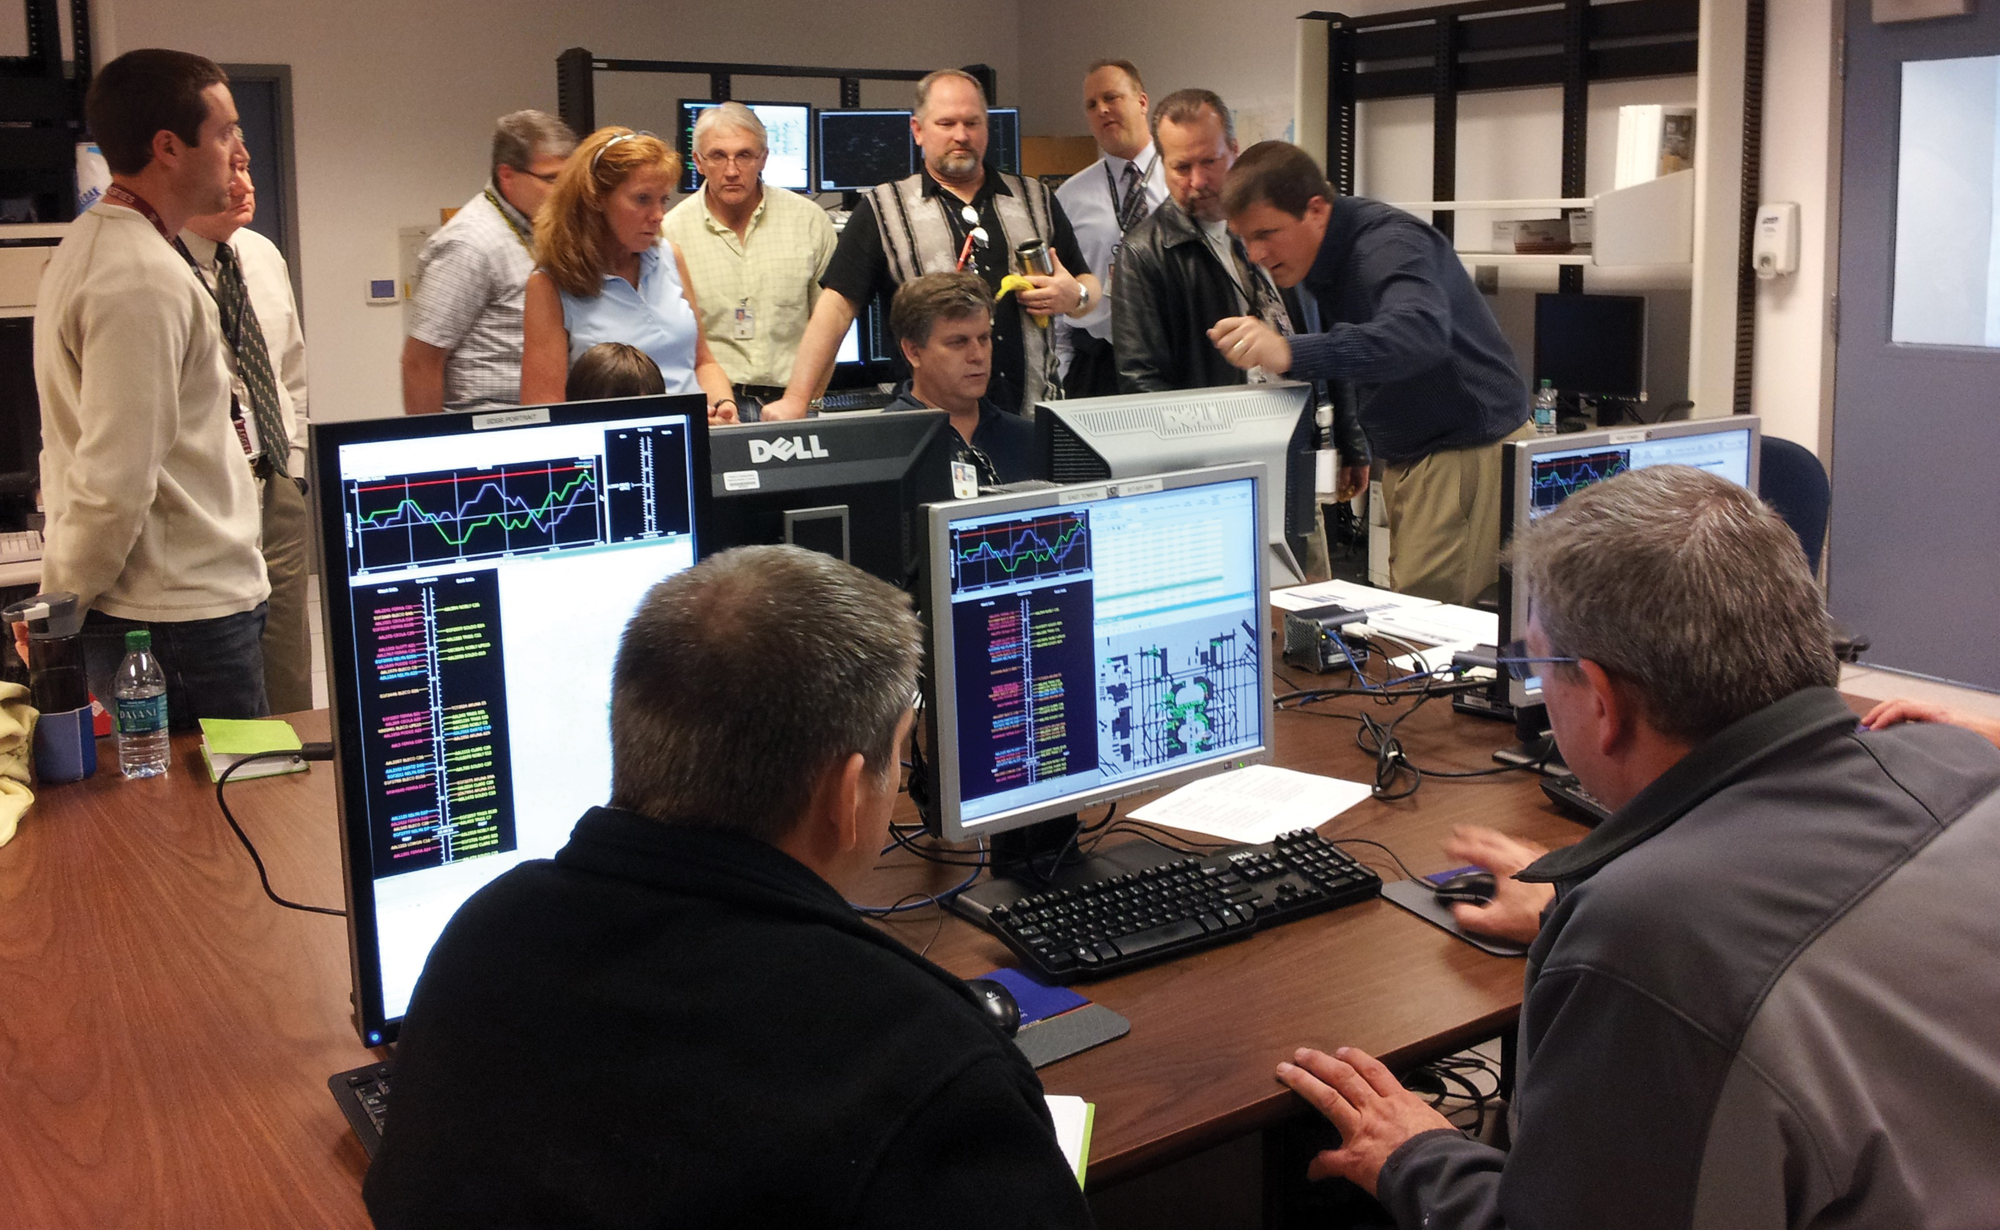 In a room, NASA and FAA traffic management coordinators gather around different monitors reviewing the PDRC system.